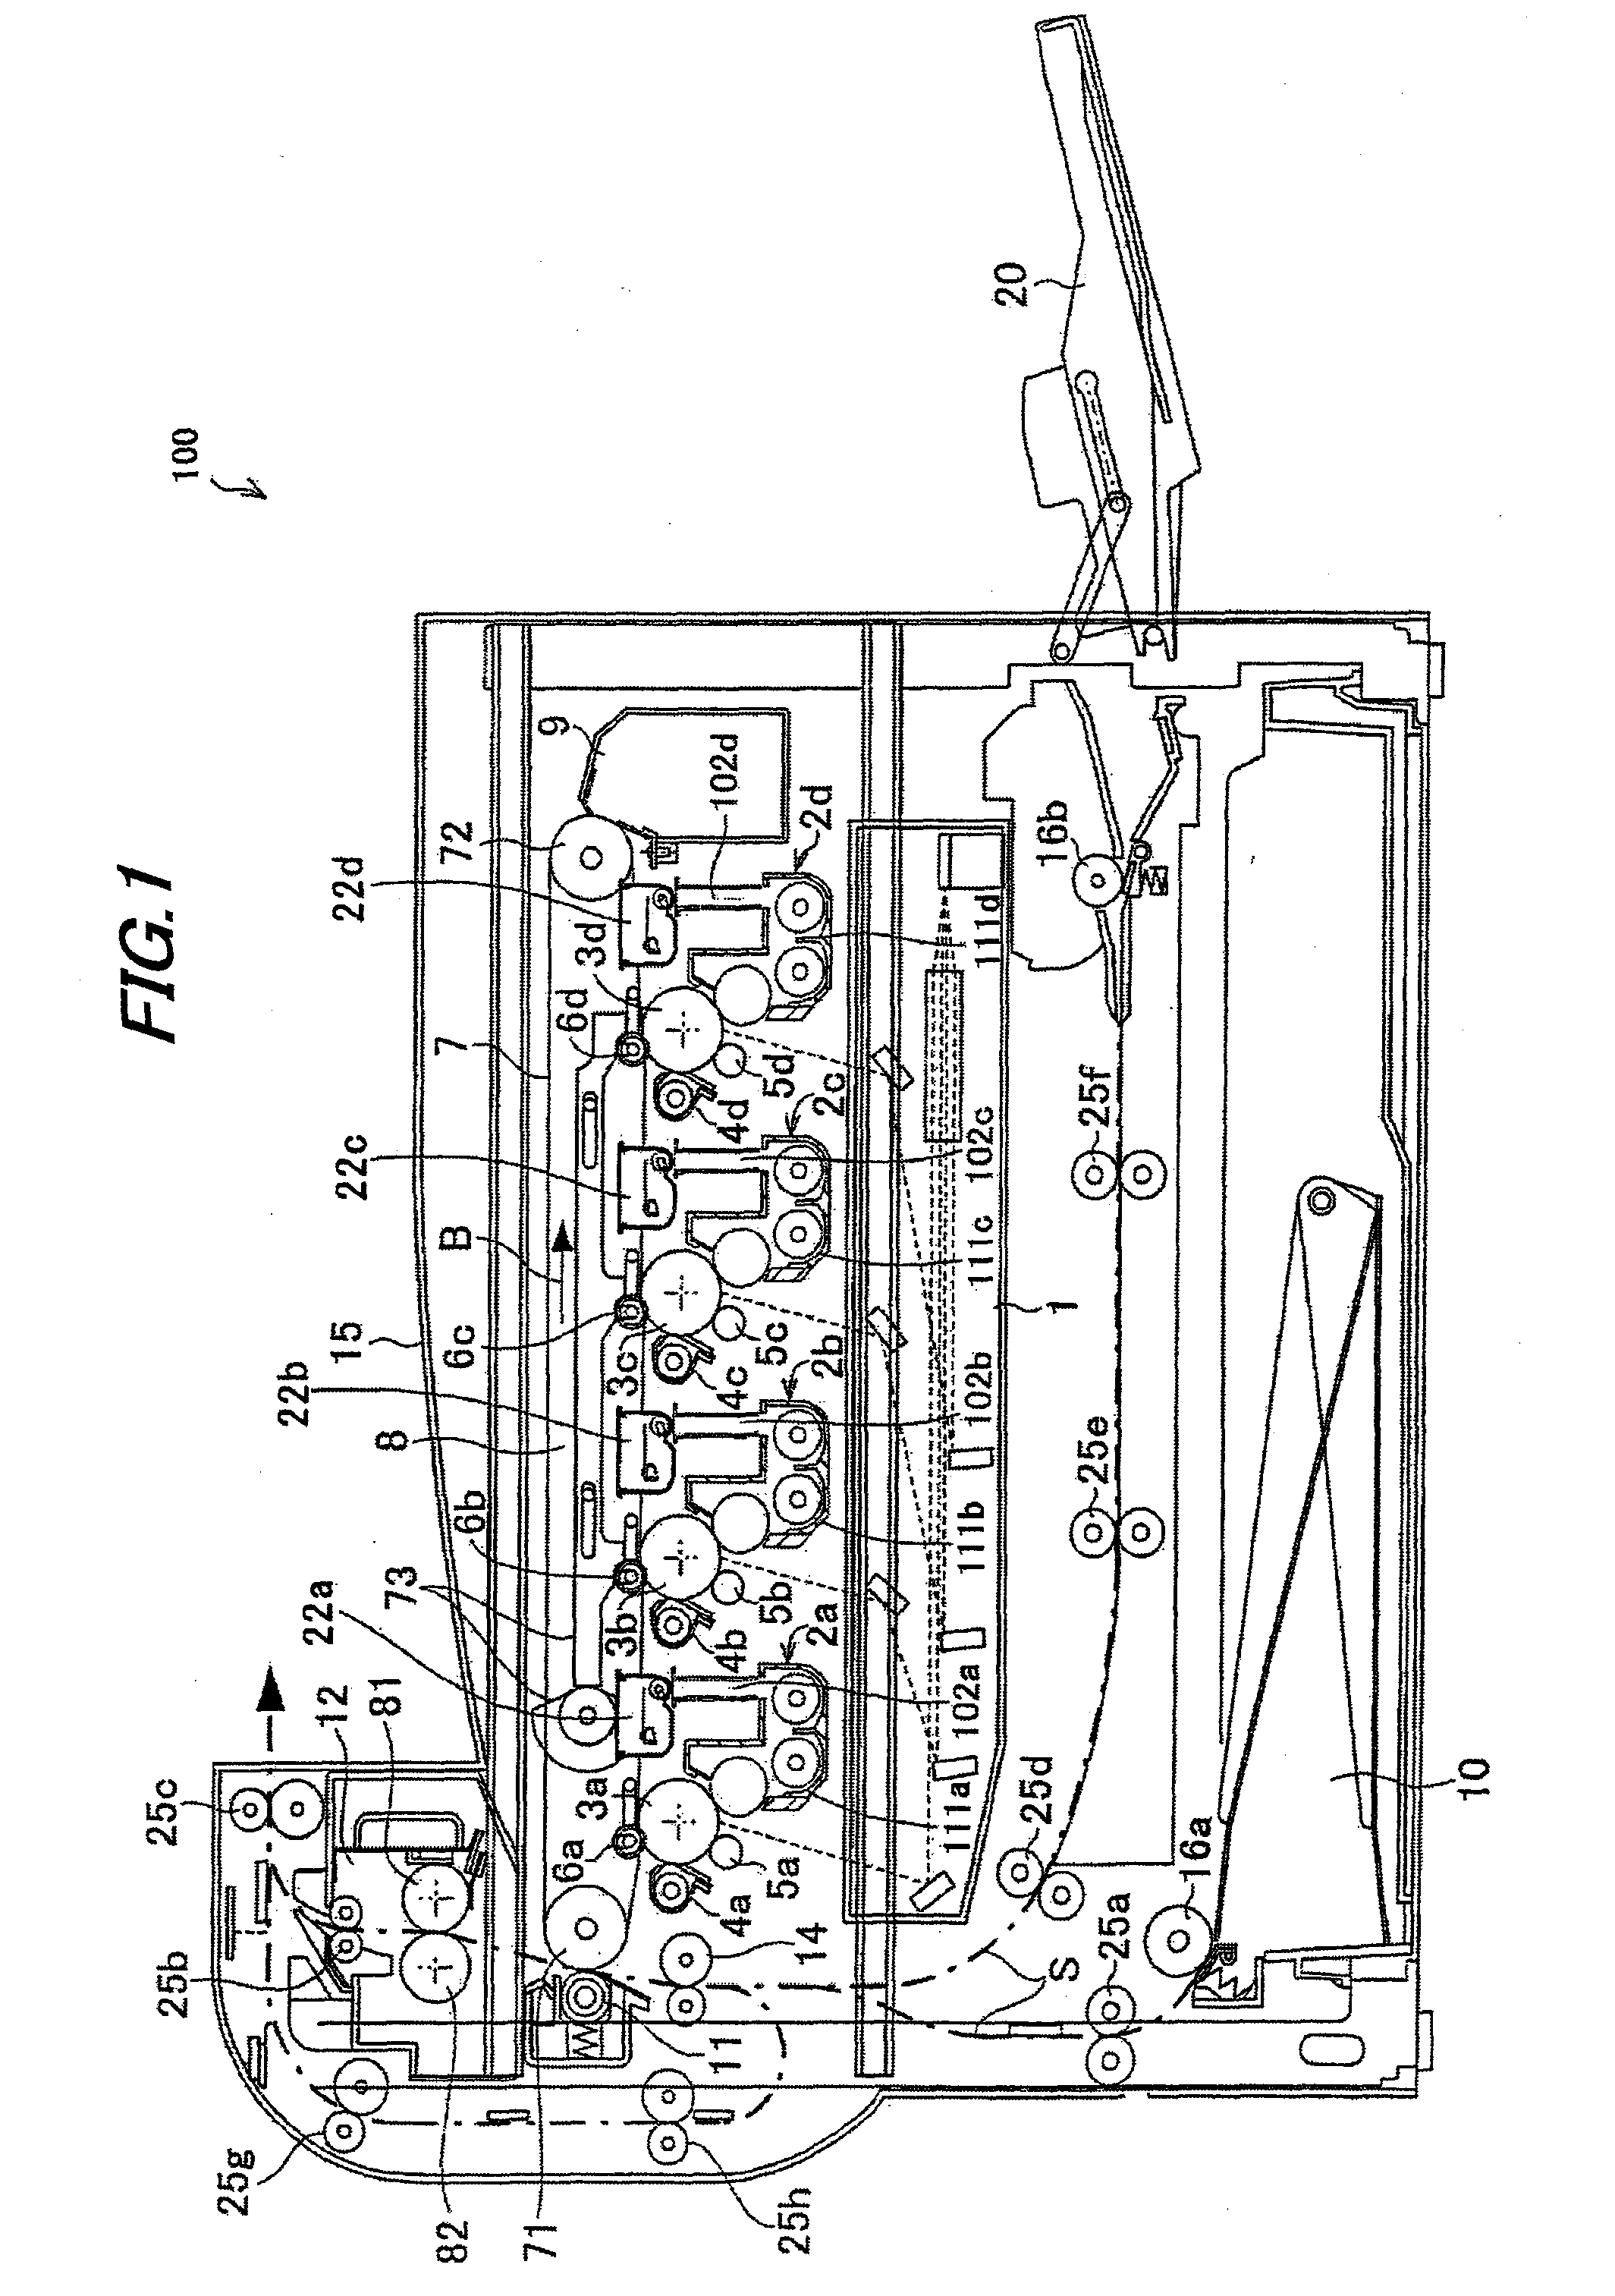 Image forming apparatus and toner supply method